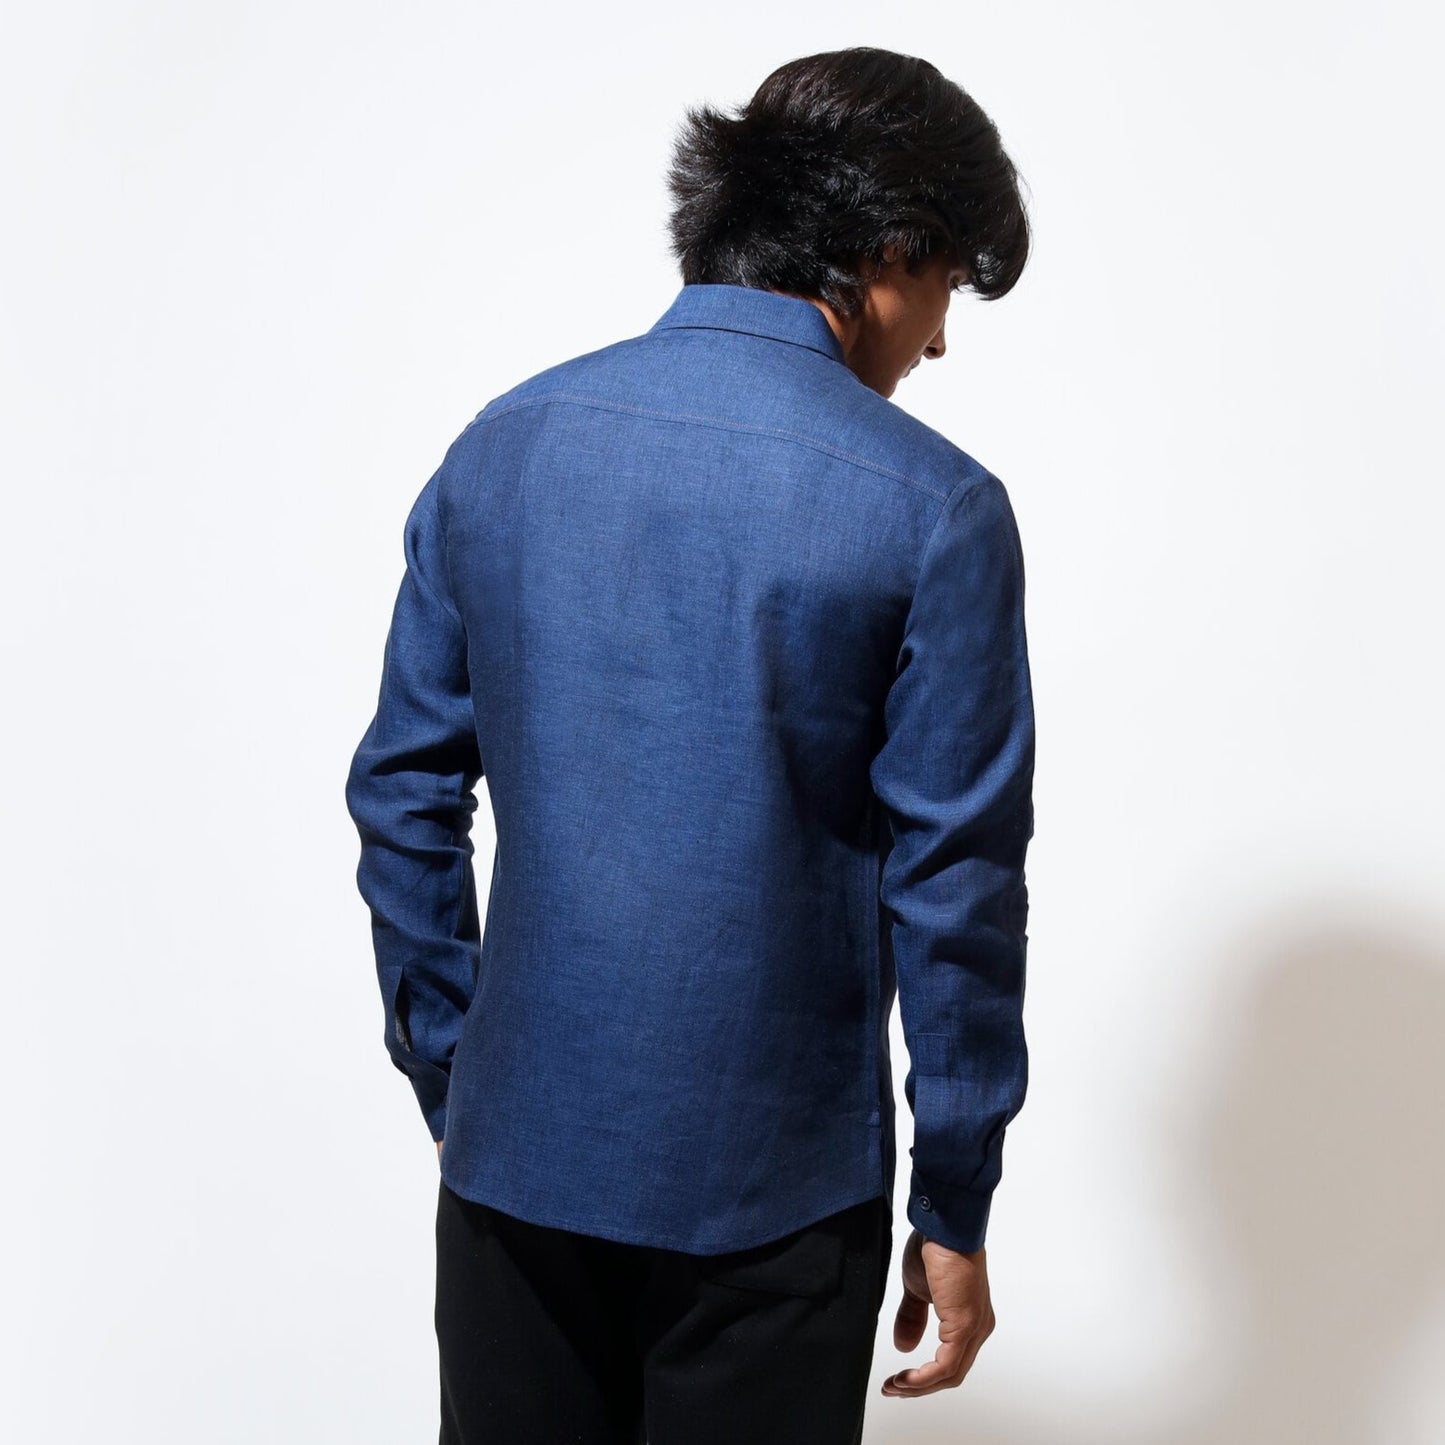 Long sleeve shirt with stitch down pintuck along front